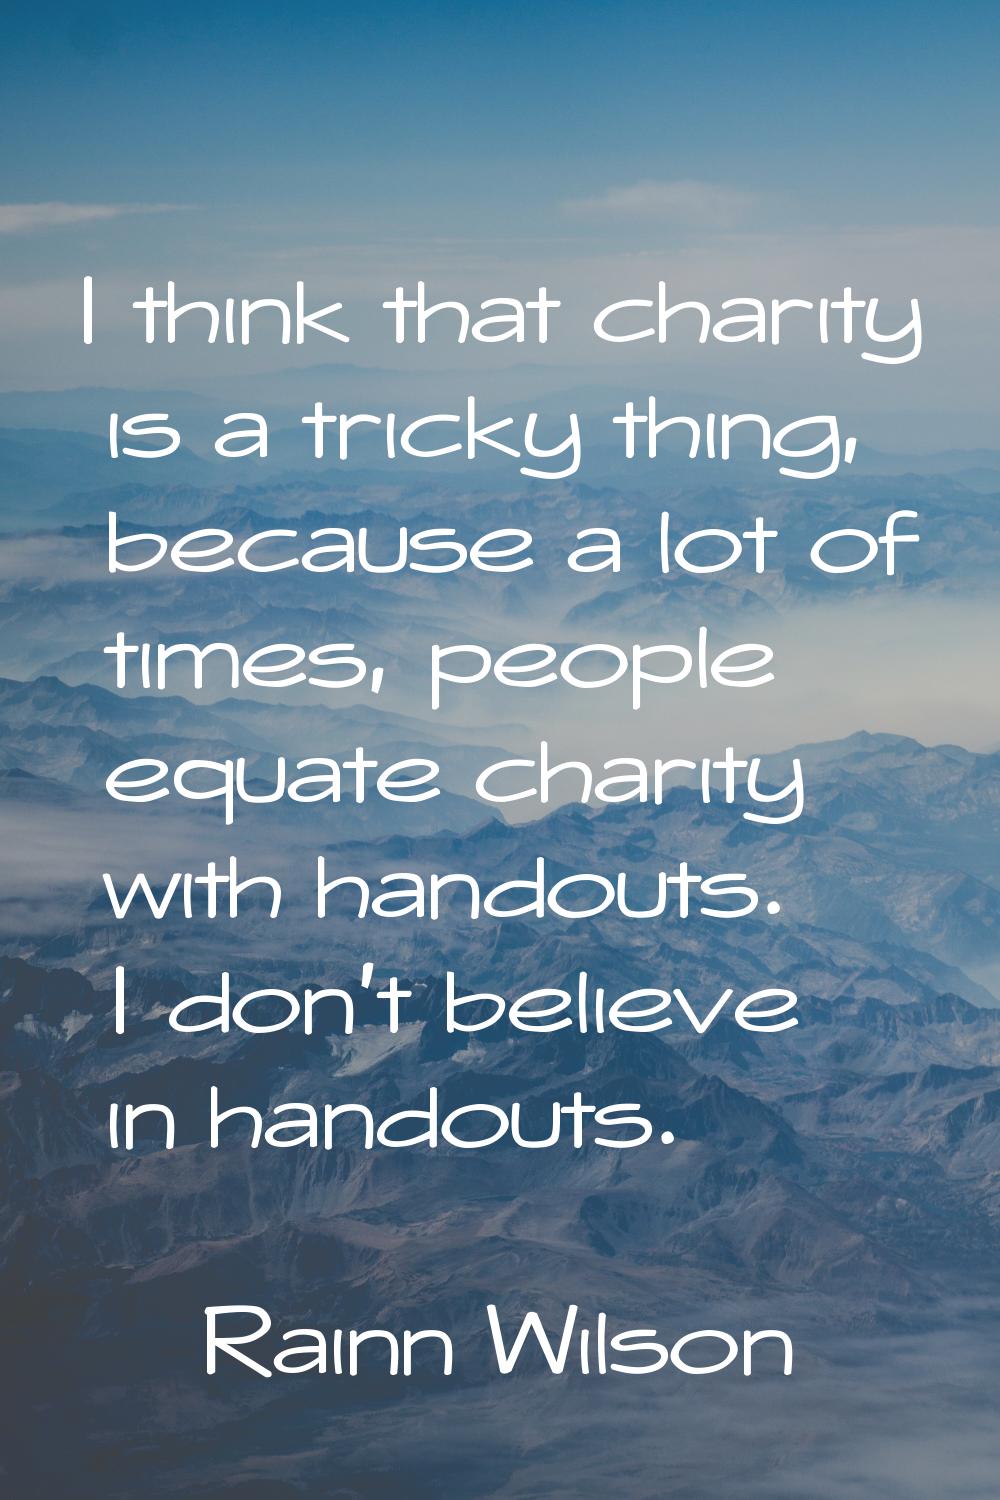 I think that charity is a tricky thing, because a lot of times, people equate charity with handouts